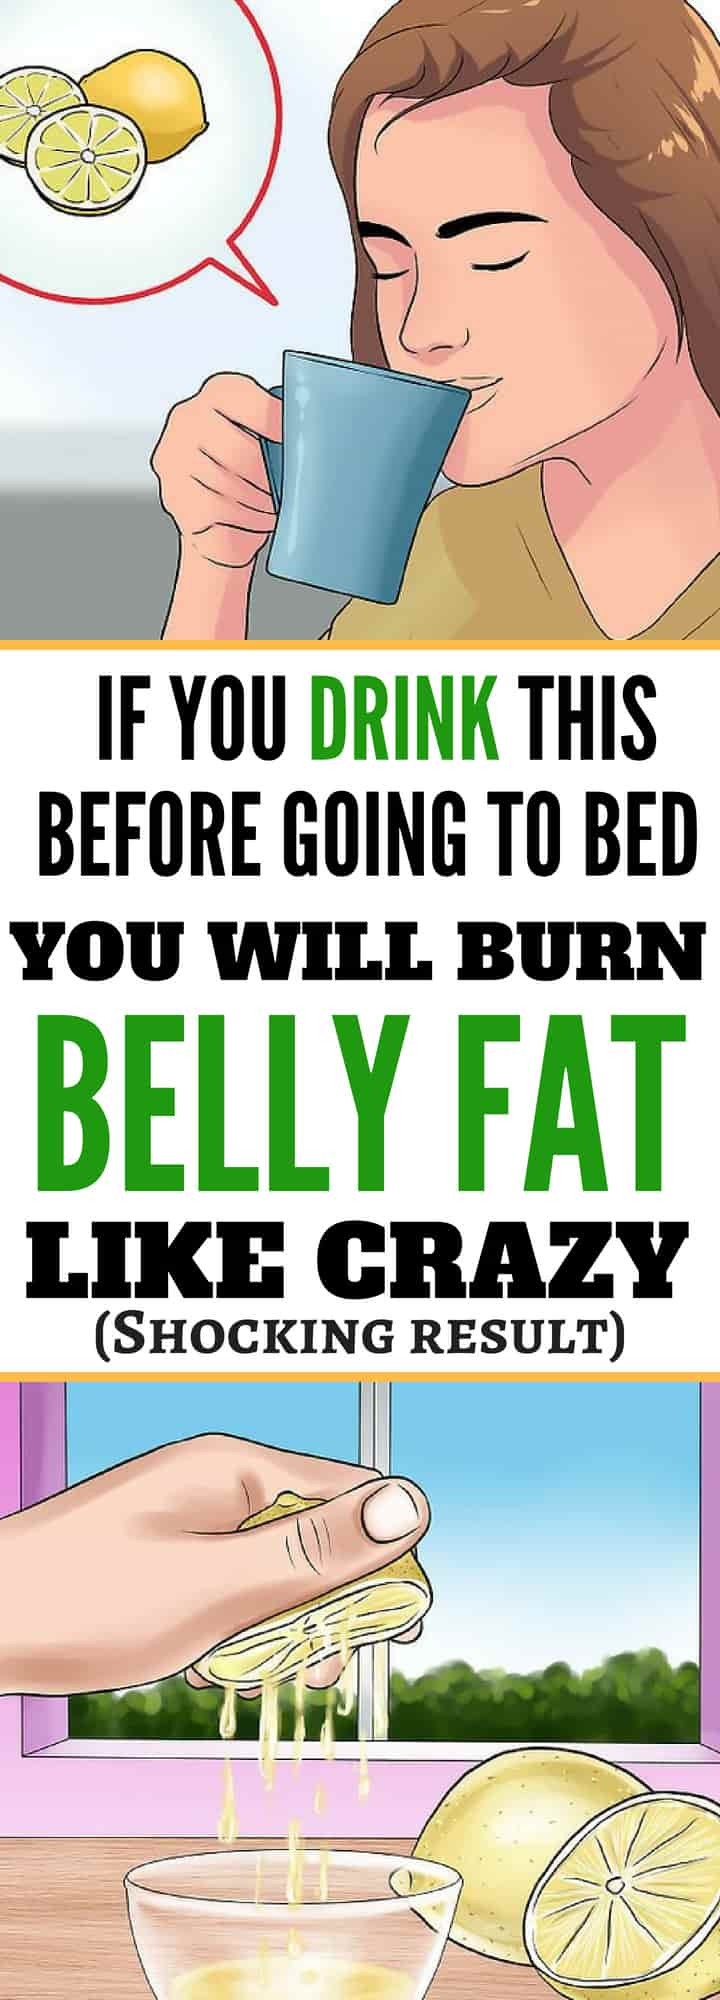 Drink This Before Going To Bed Burn Belly Fat
 IF YOU DRINK THIS BEFORE GOING TO BED YOU WILL BURN BELLY